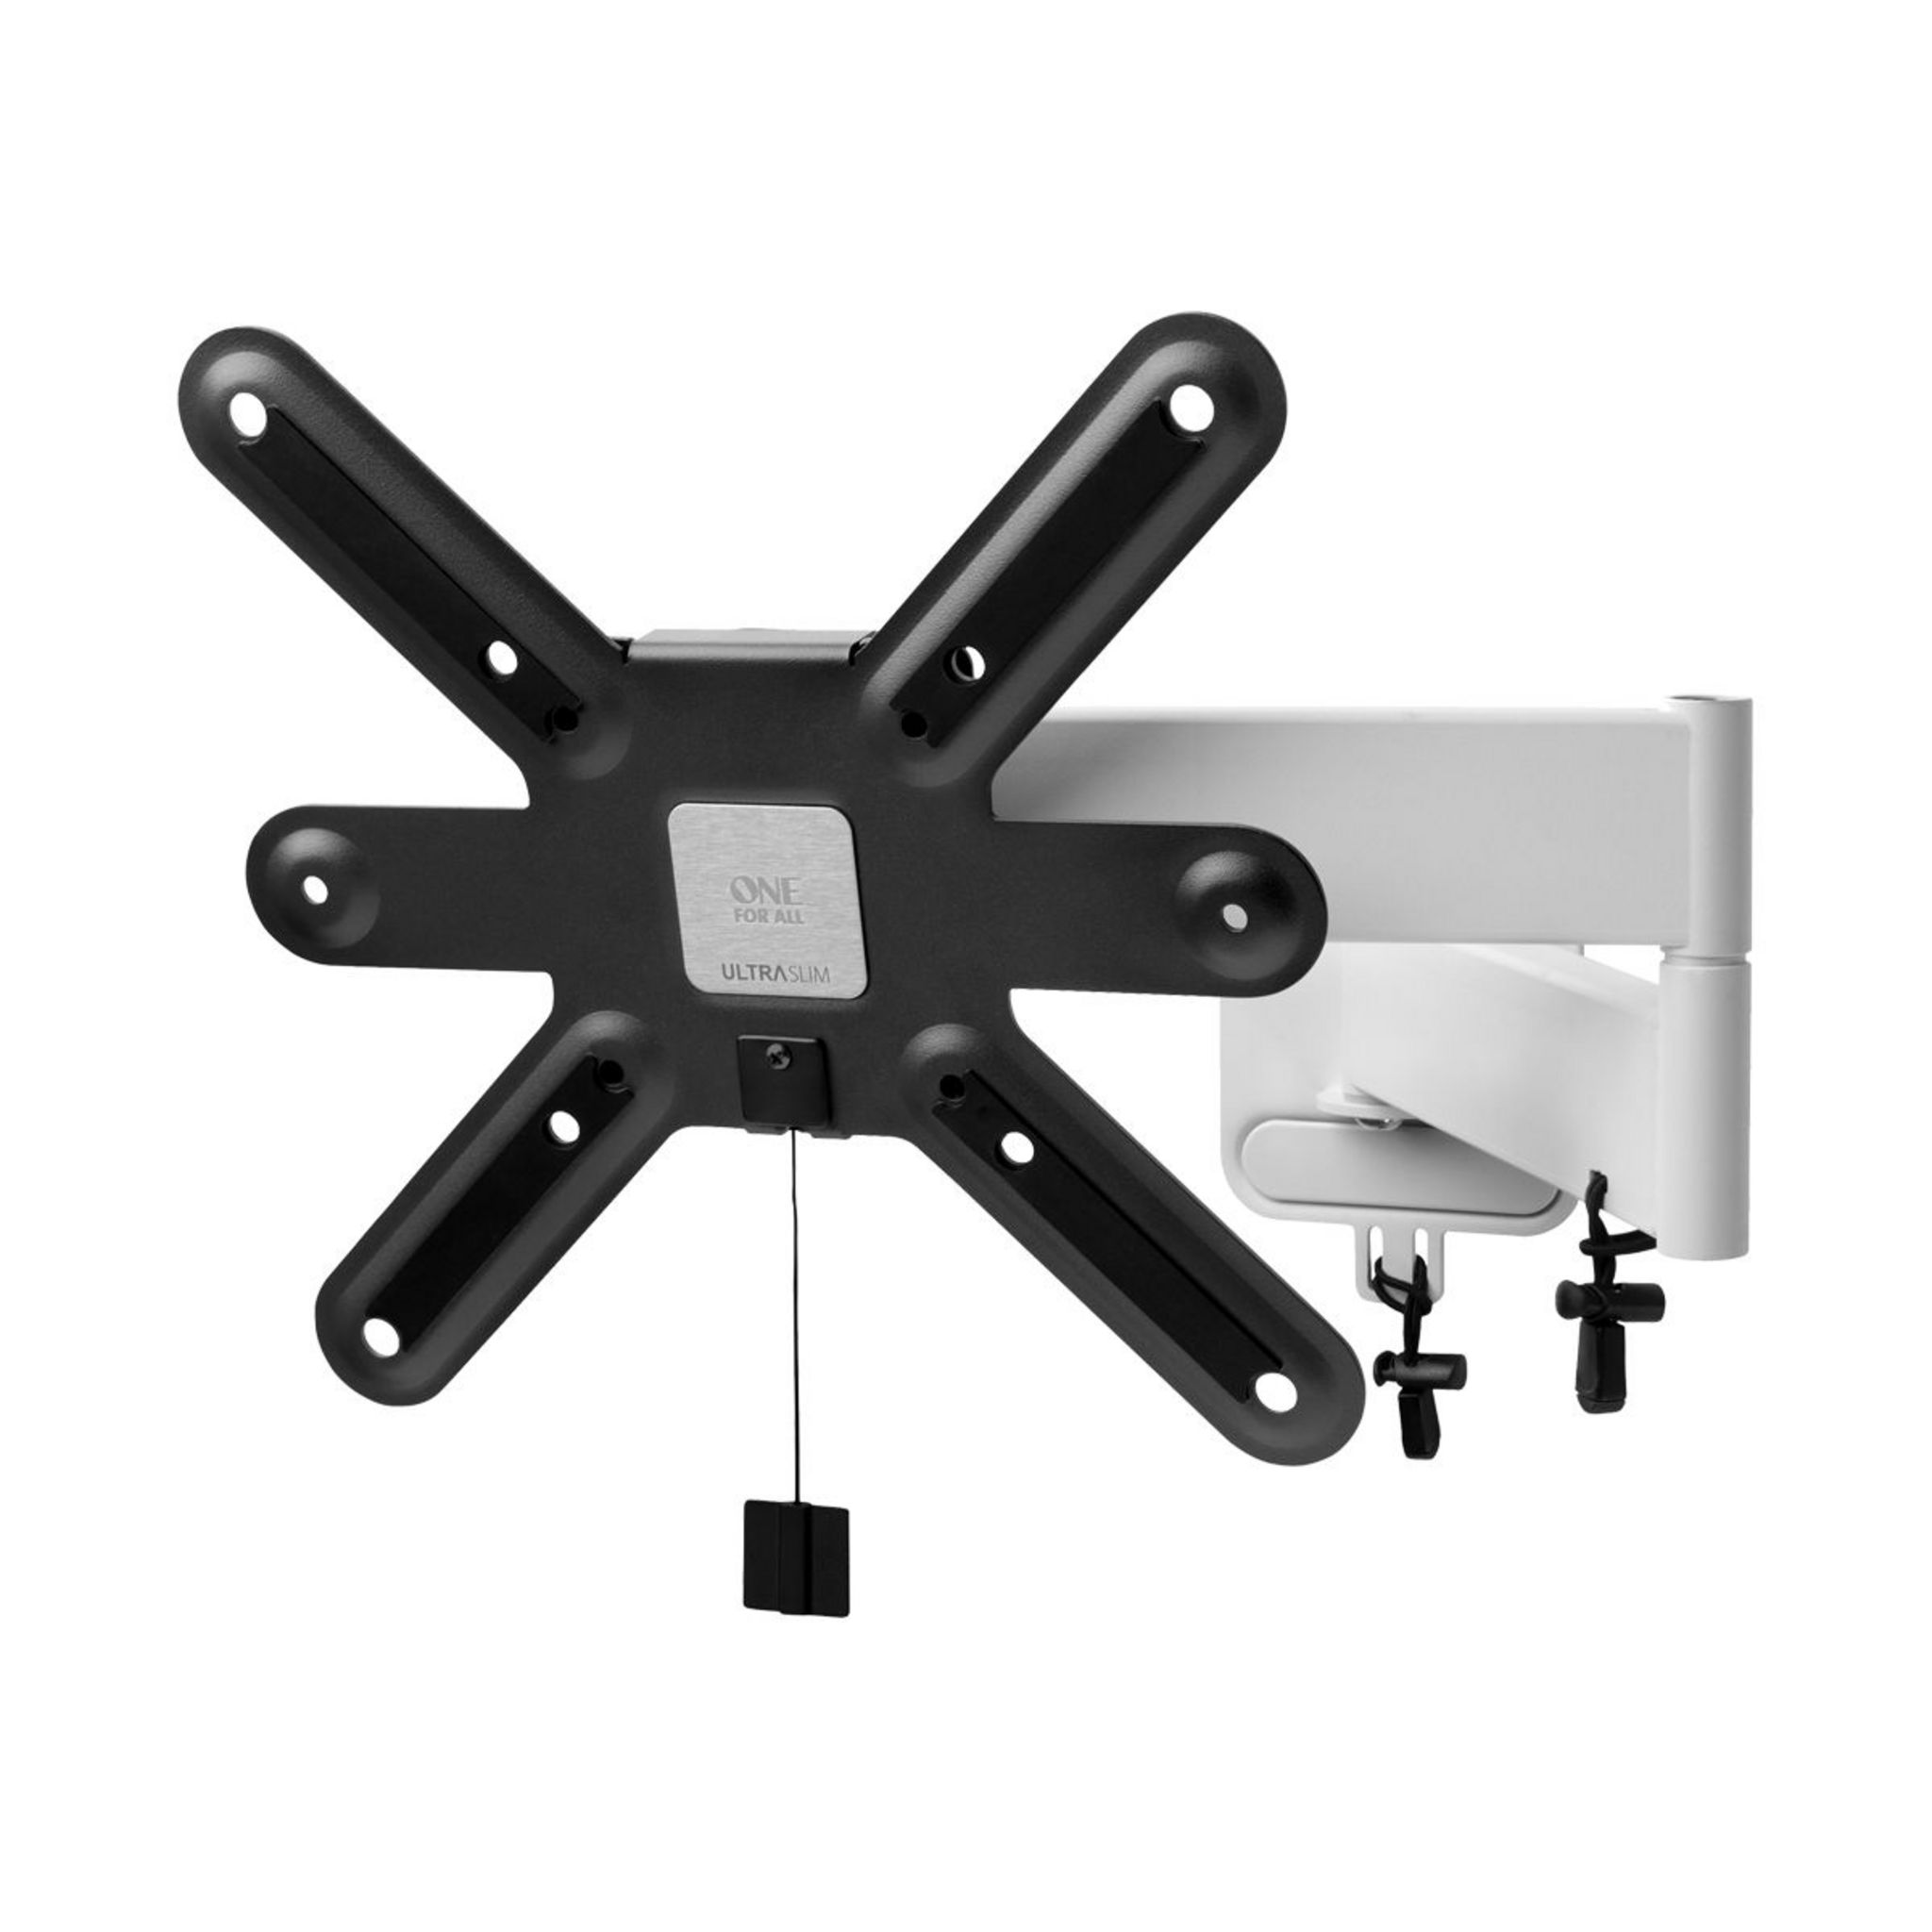 Support mural TV MELICONI orientable FLAG TV - TV 49-82p